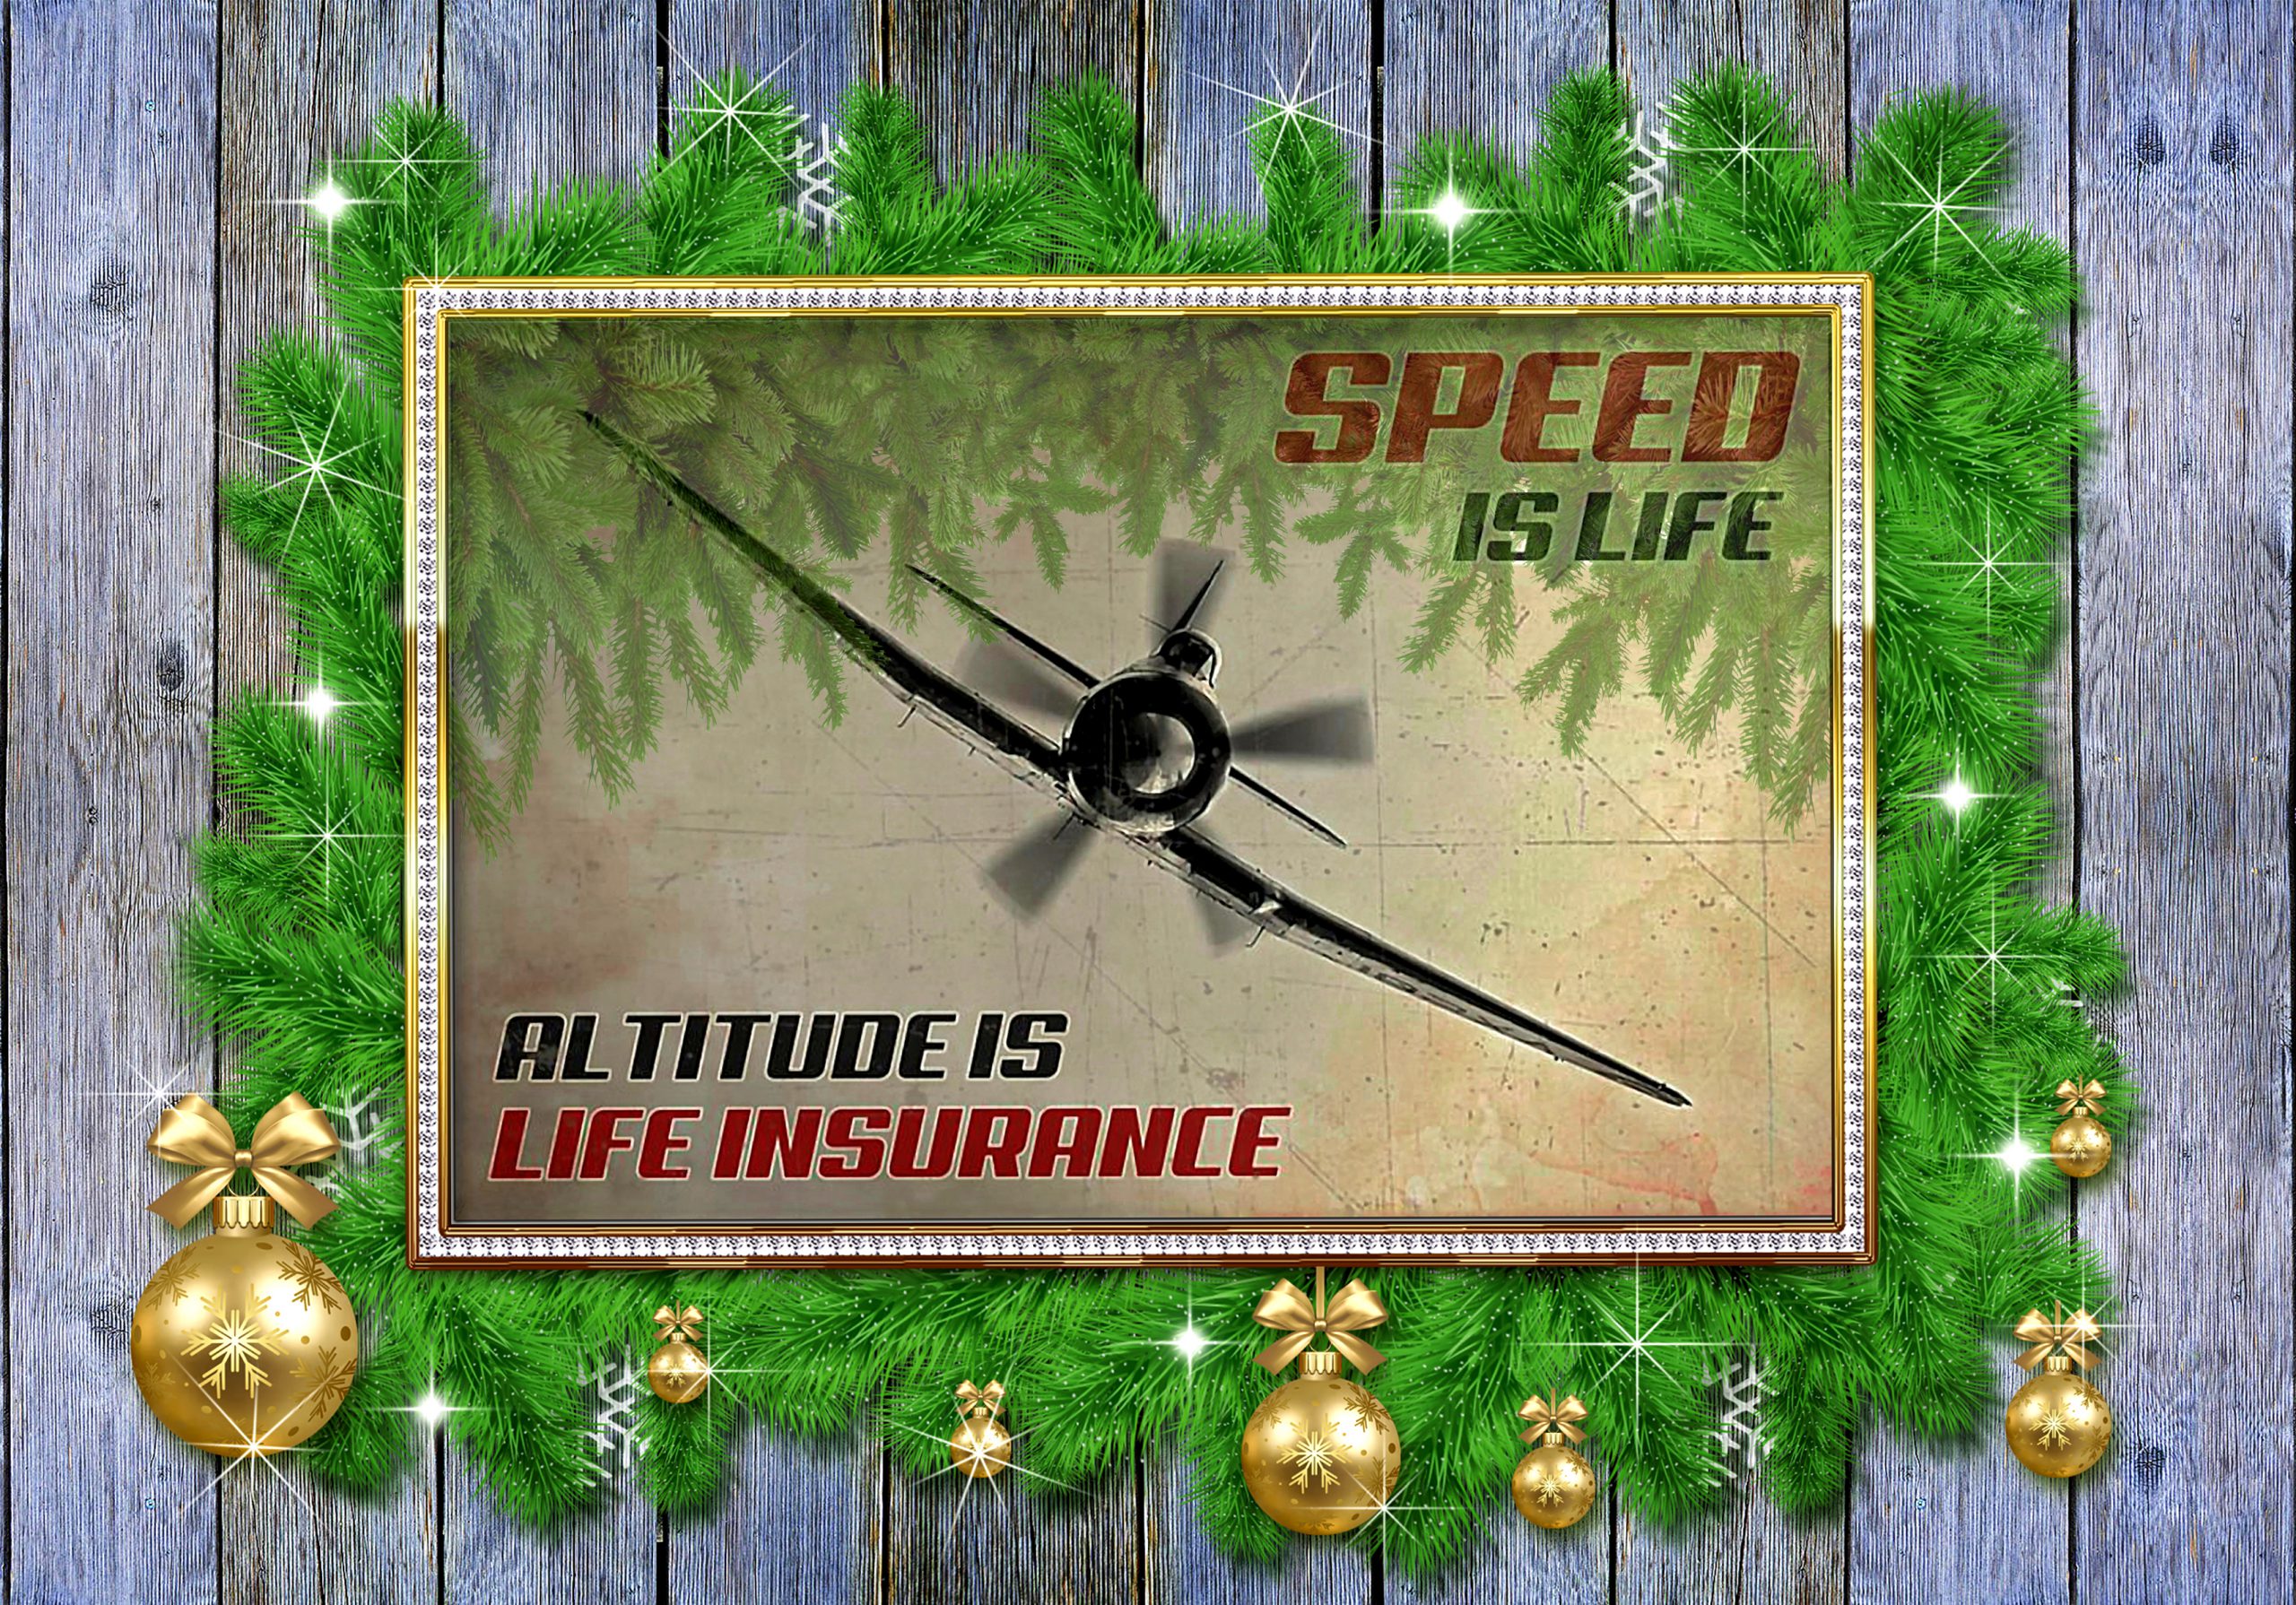 Pilot Speed Is Life Al Titides Life Insurance Poster 2